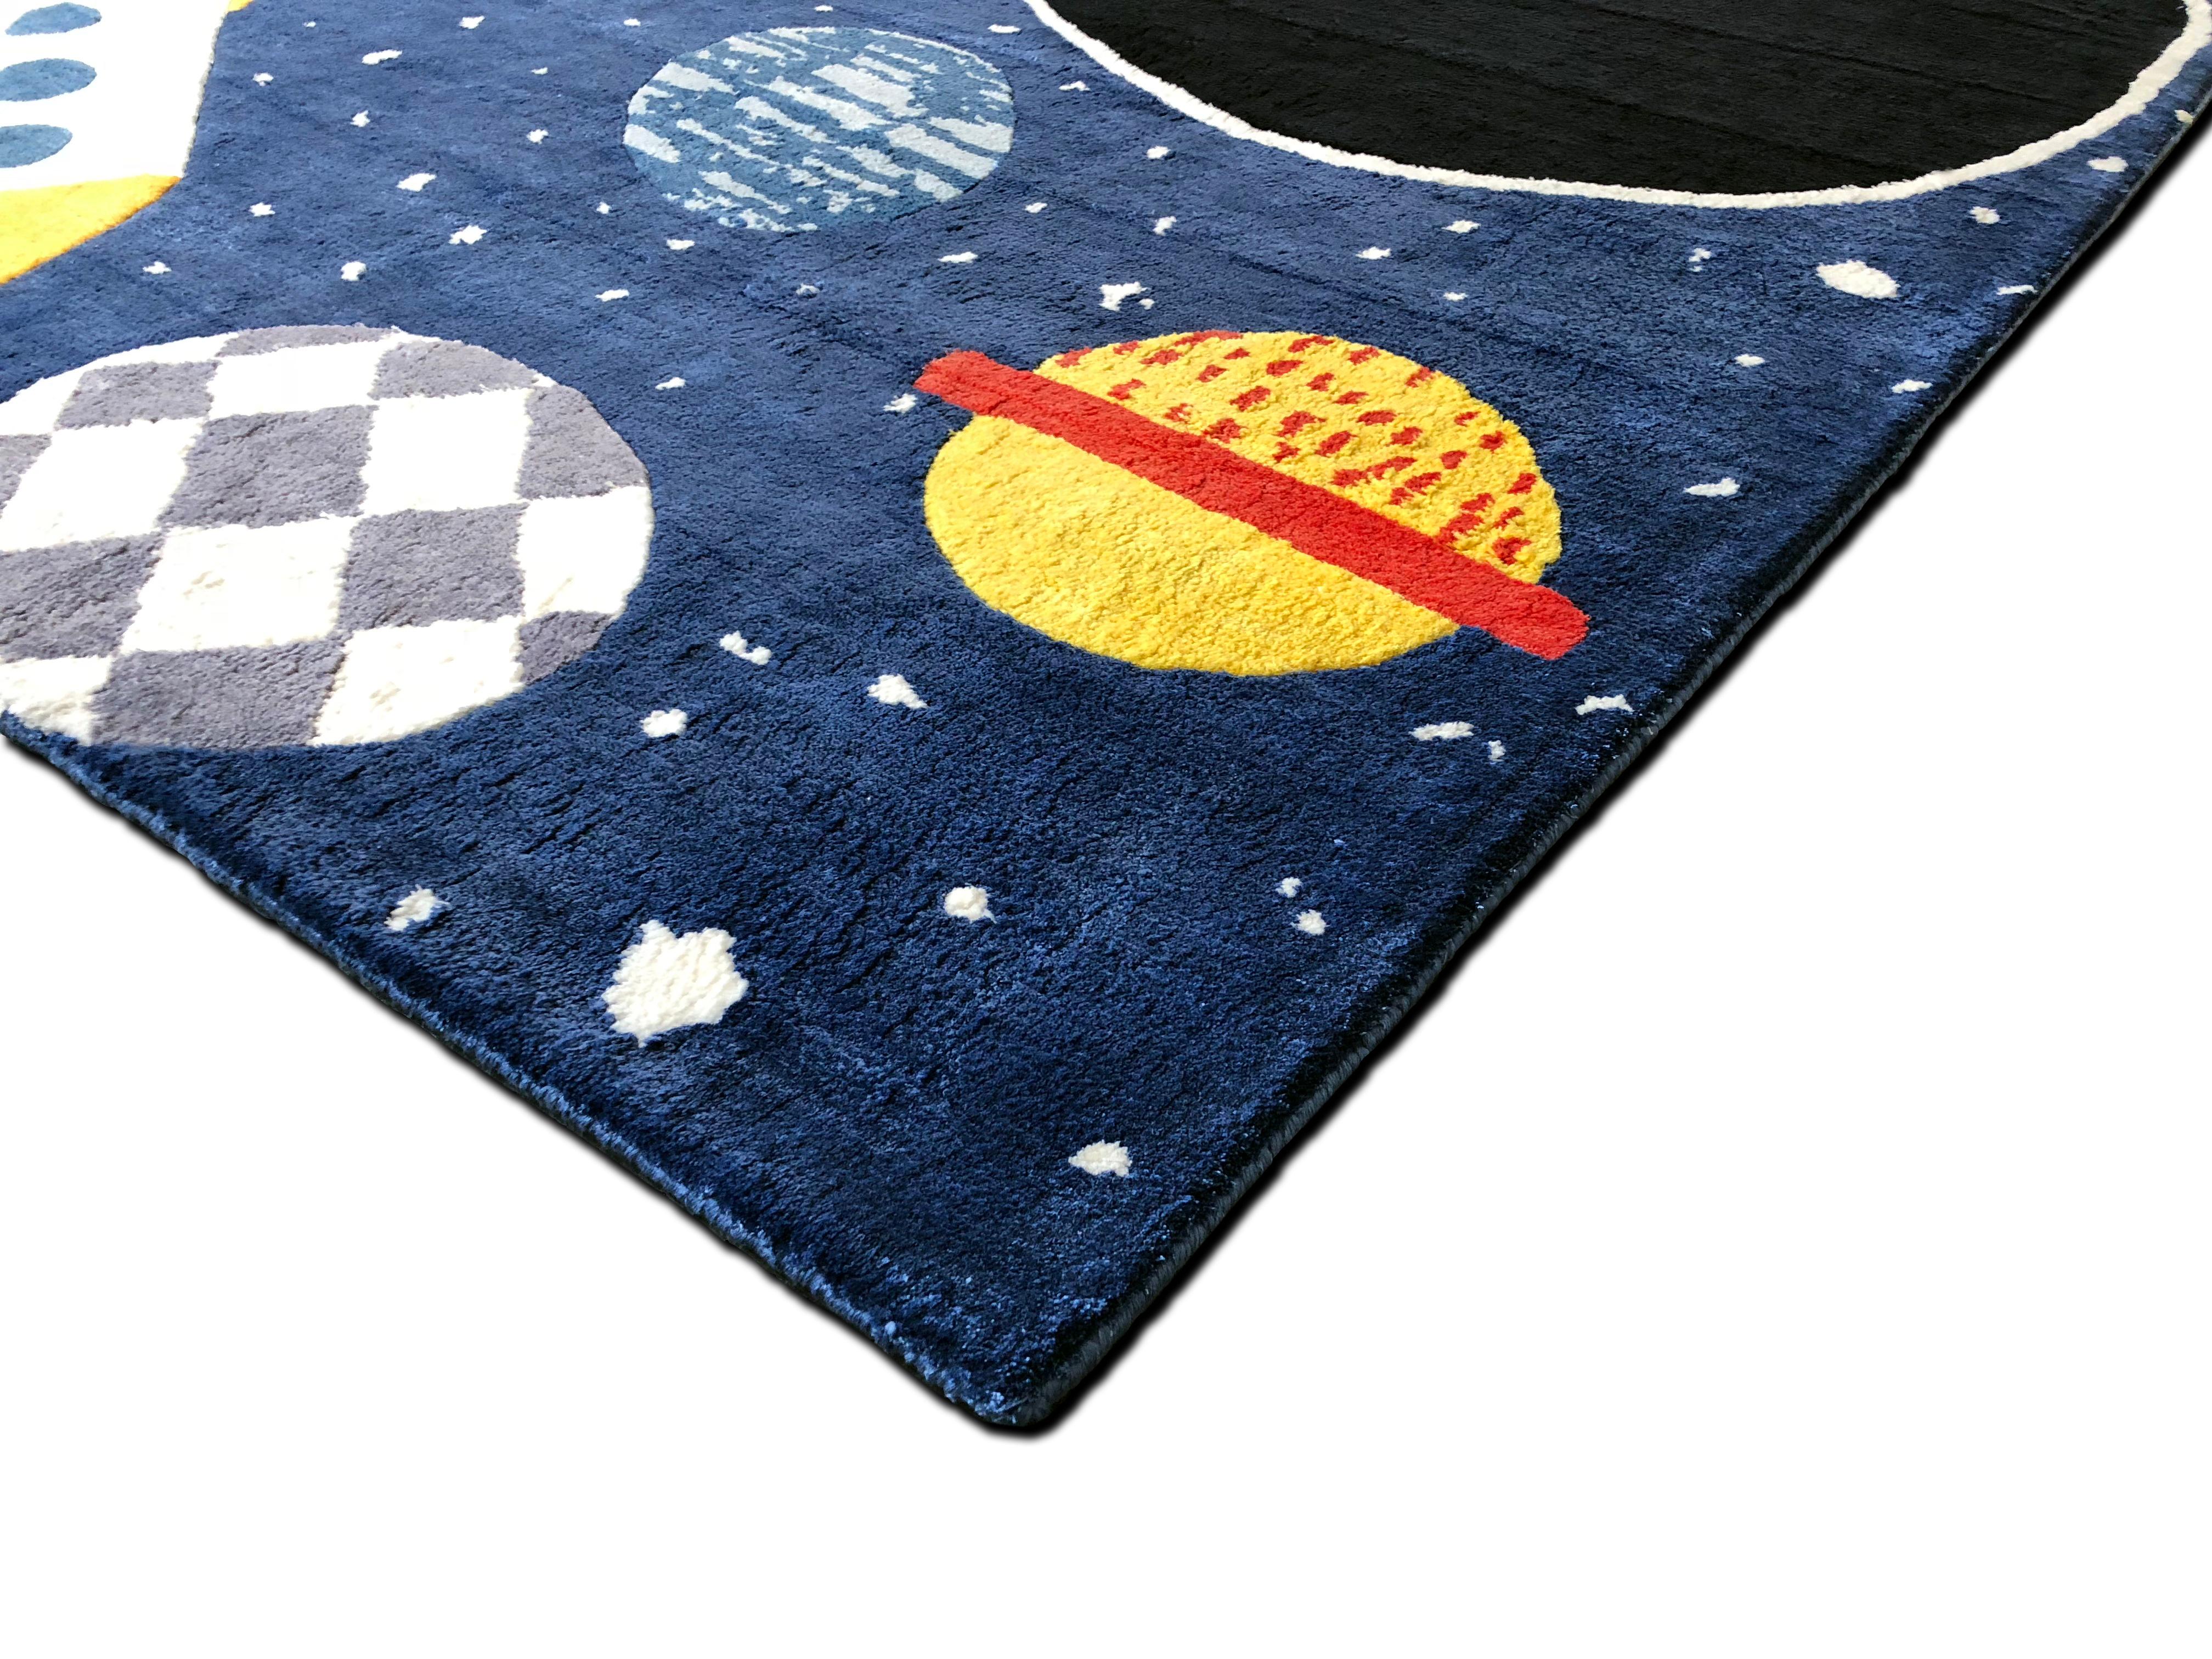 Space Ace Rug by Daria Solak, Hand Knotted, 100% New Zealand Wool Size 100x125cm In New Condition For Sale In London, GB